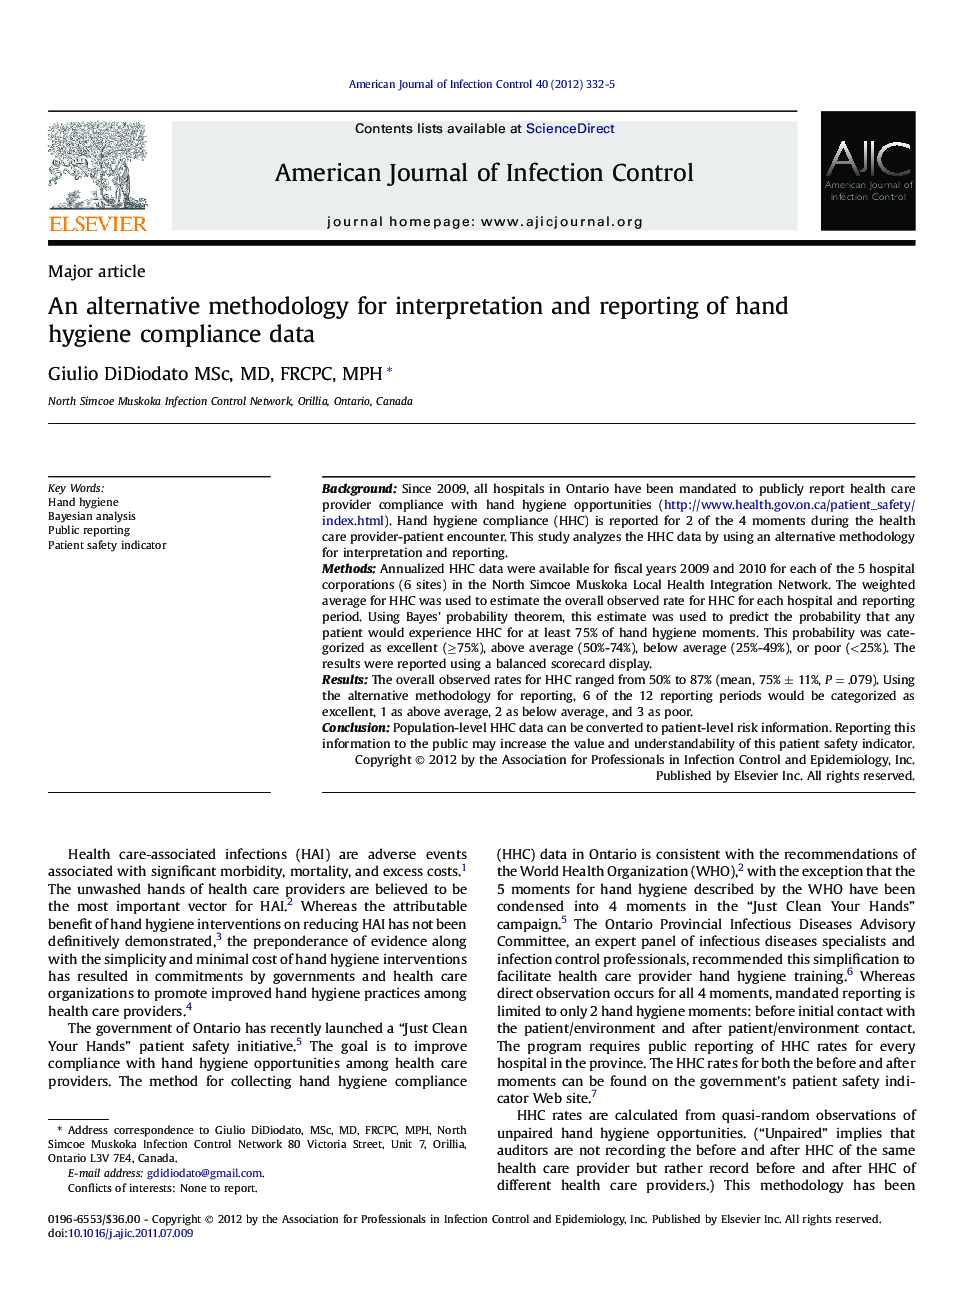 An alternative methodology for interpretation and reporting of hand hygiene compliance data 